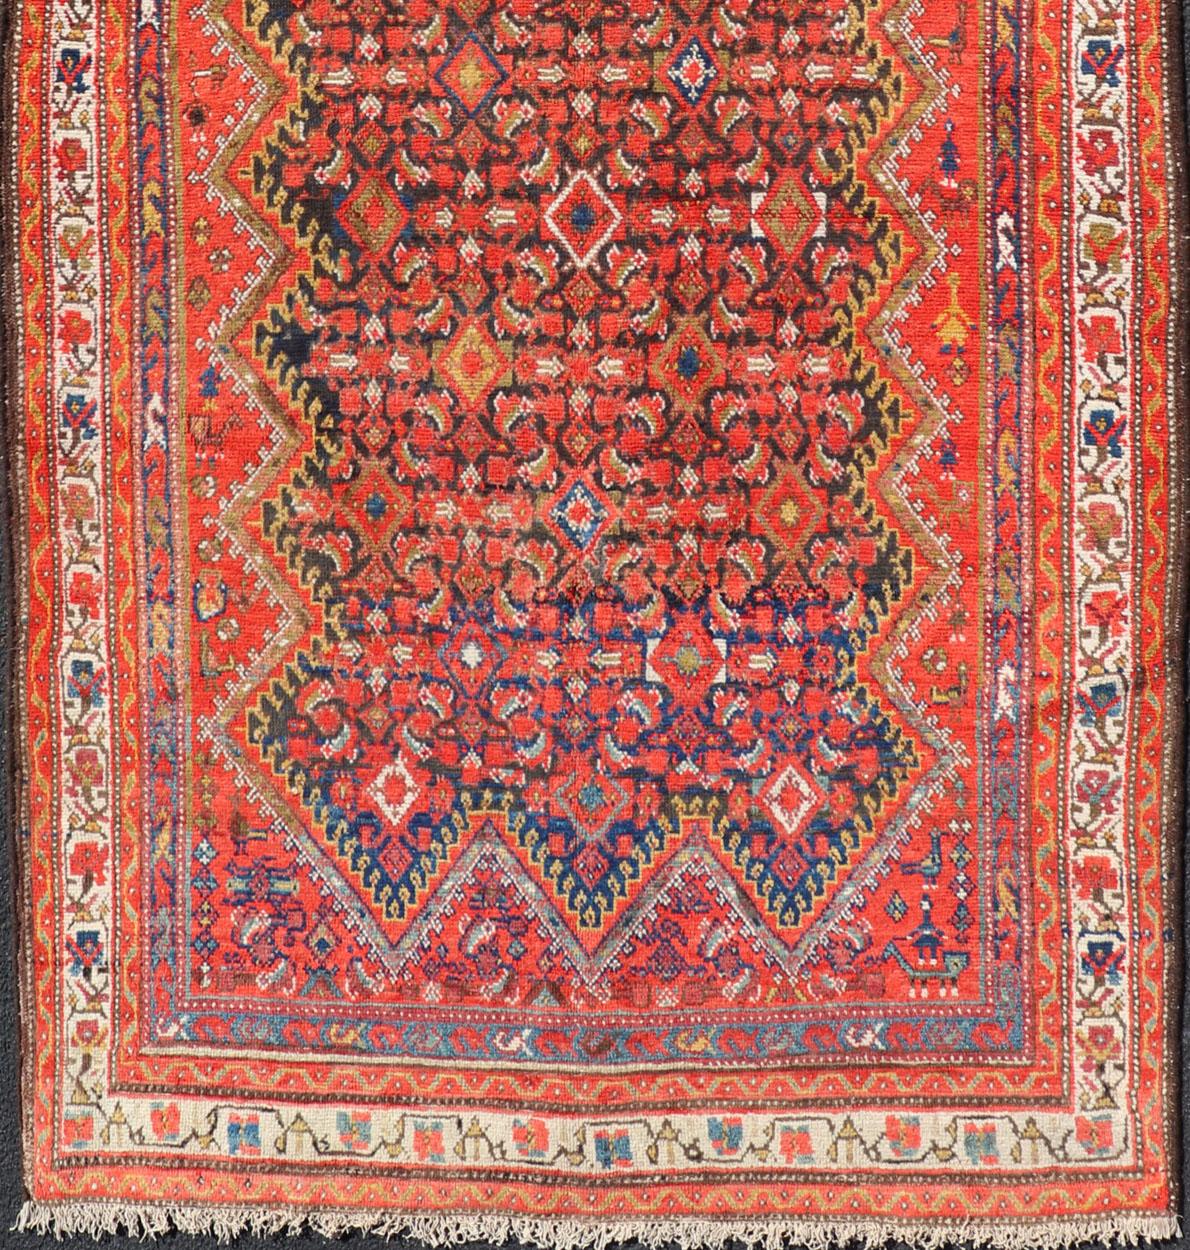 Antique Malayer Gallery rug, Keivan Woven Arts/rug/ PTA-21017, country of origin / type: Persian / Malayer, circa 1910.

Measures: 4'8'' x 9'9''.

This magnificent Malayer Gallery rug features an all-over Herati Design centered by Diamond motifs.